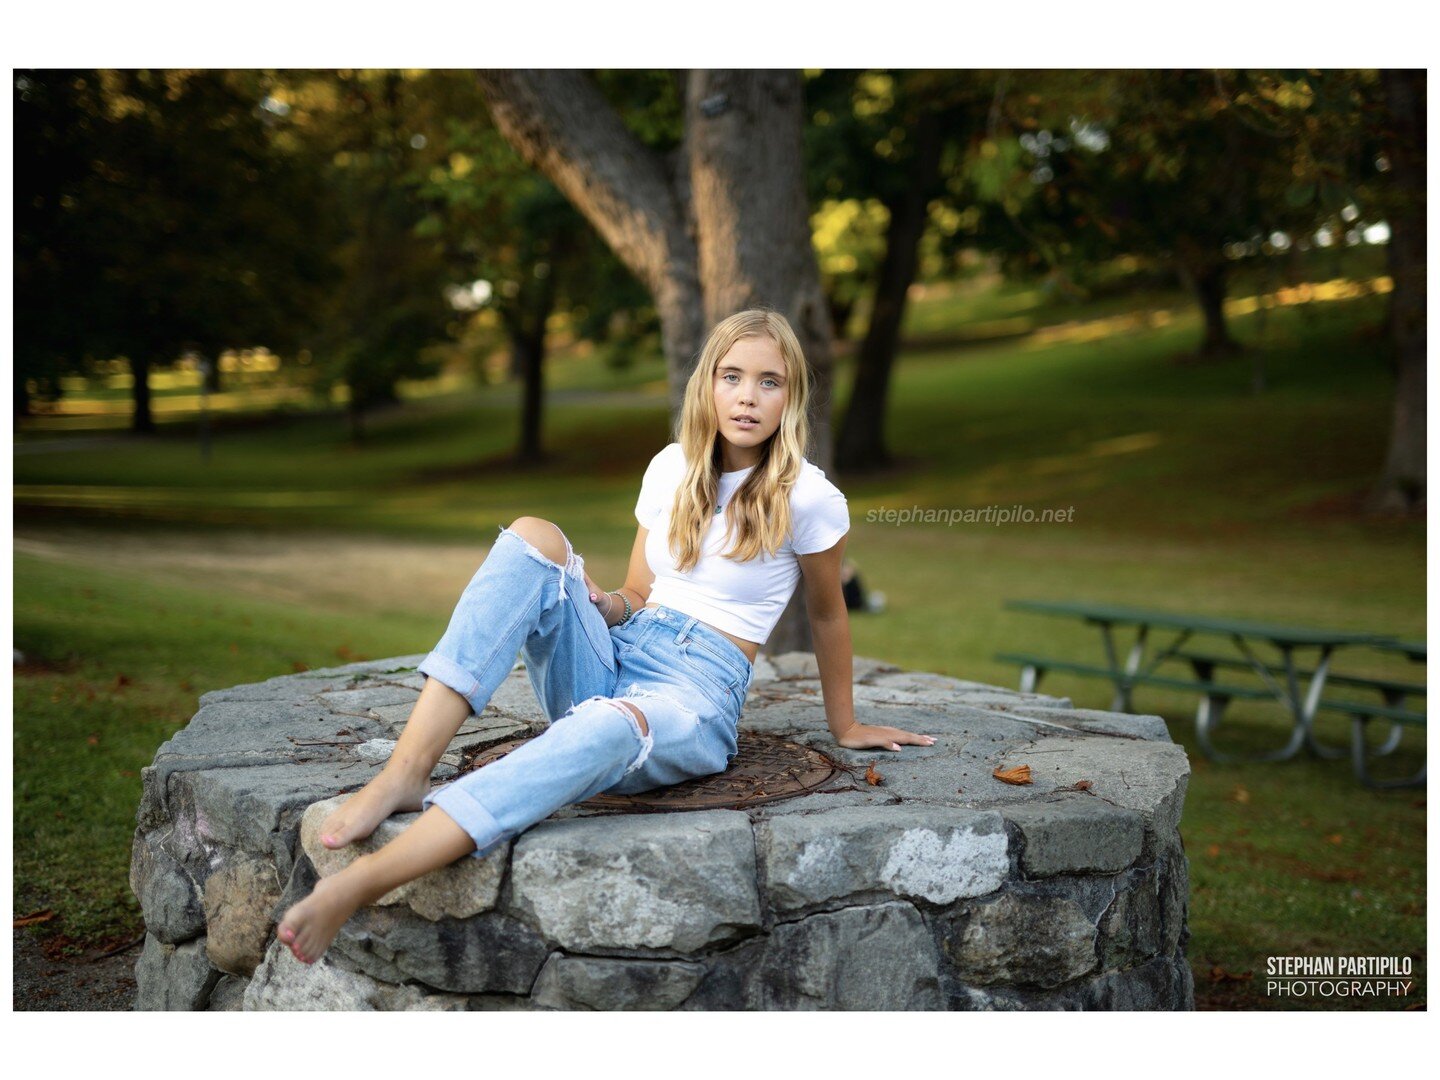 https://www.stephanpartipilo.net/Hailey-Summers-x-White-Top-and-Jeans-Pants_p_387.html
Featured: Hailey Summers.
Photographer: Stephan Partipilo.
Camera: 5D Mark IV.
Lens: 50mm.
Lighting: Natural, Flash, and Strobes.
Location: Oregon and Washington.
